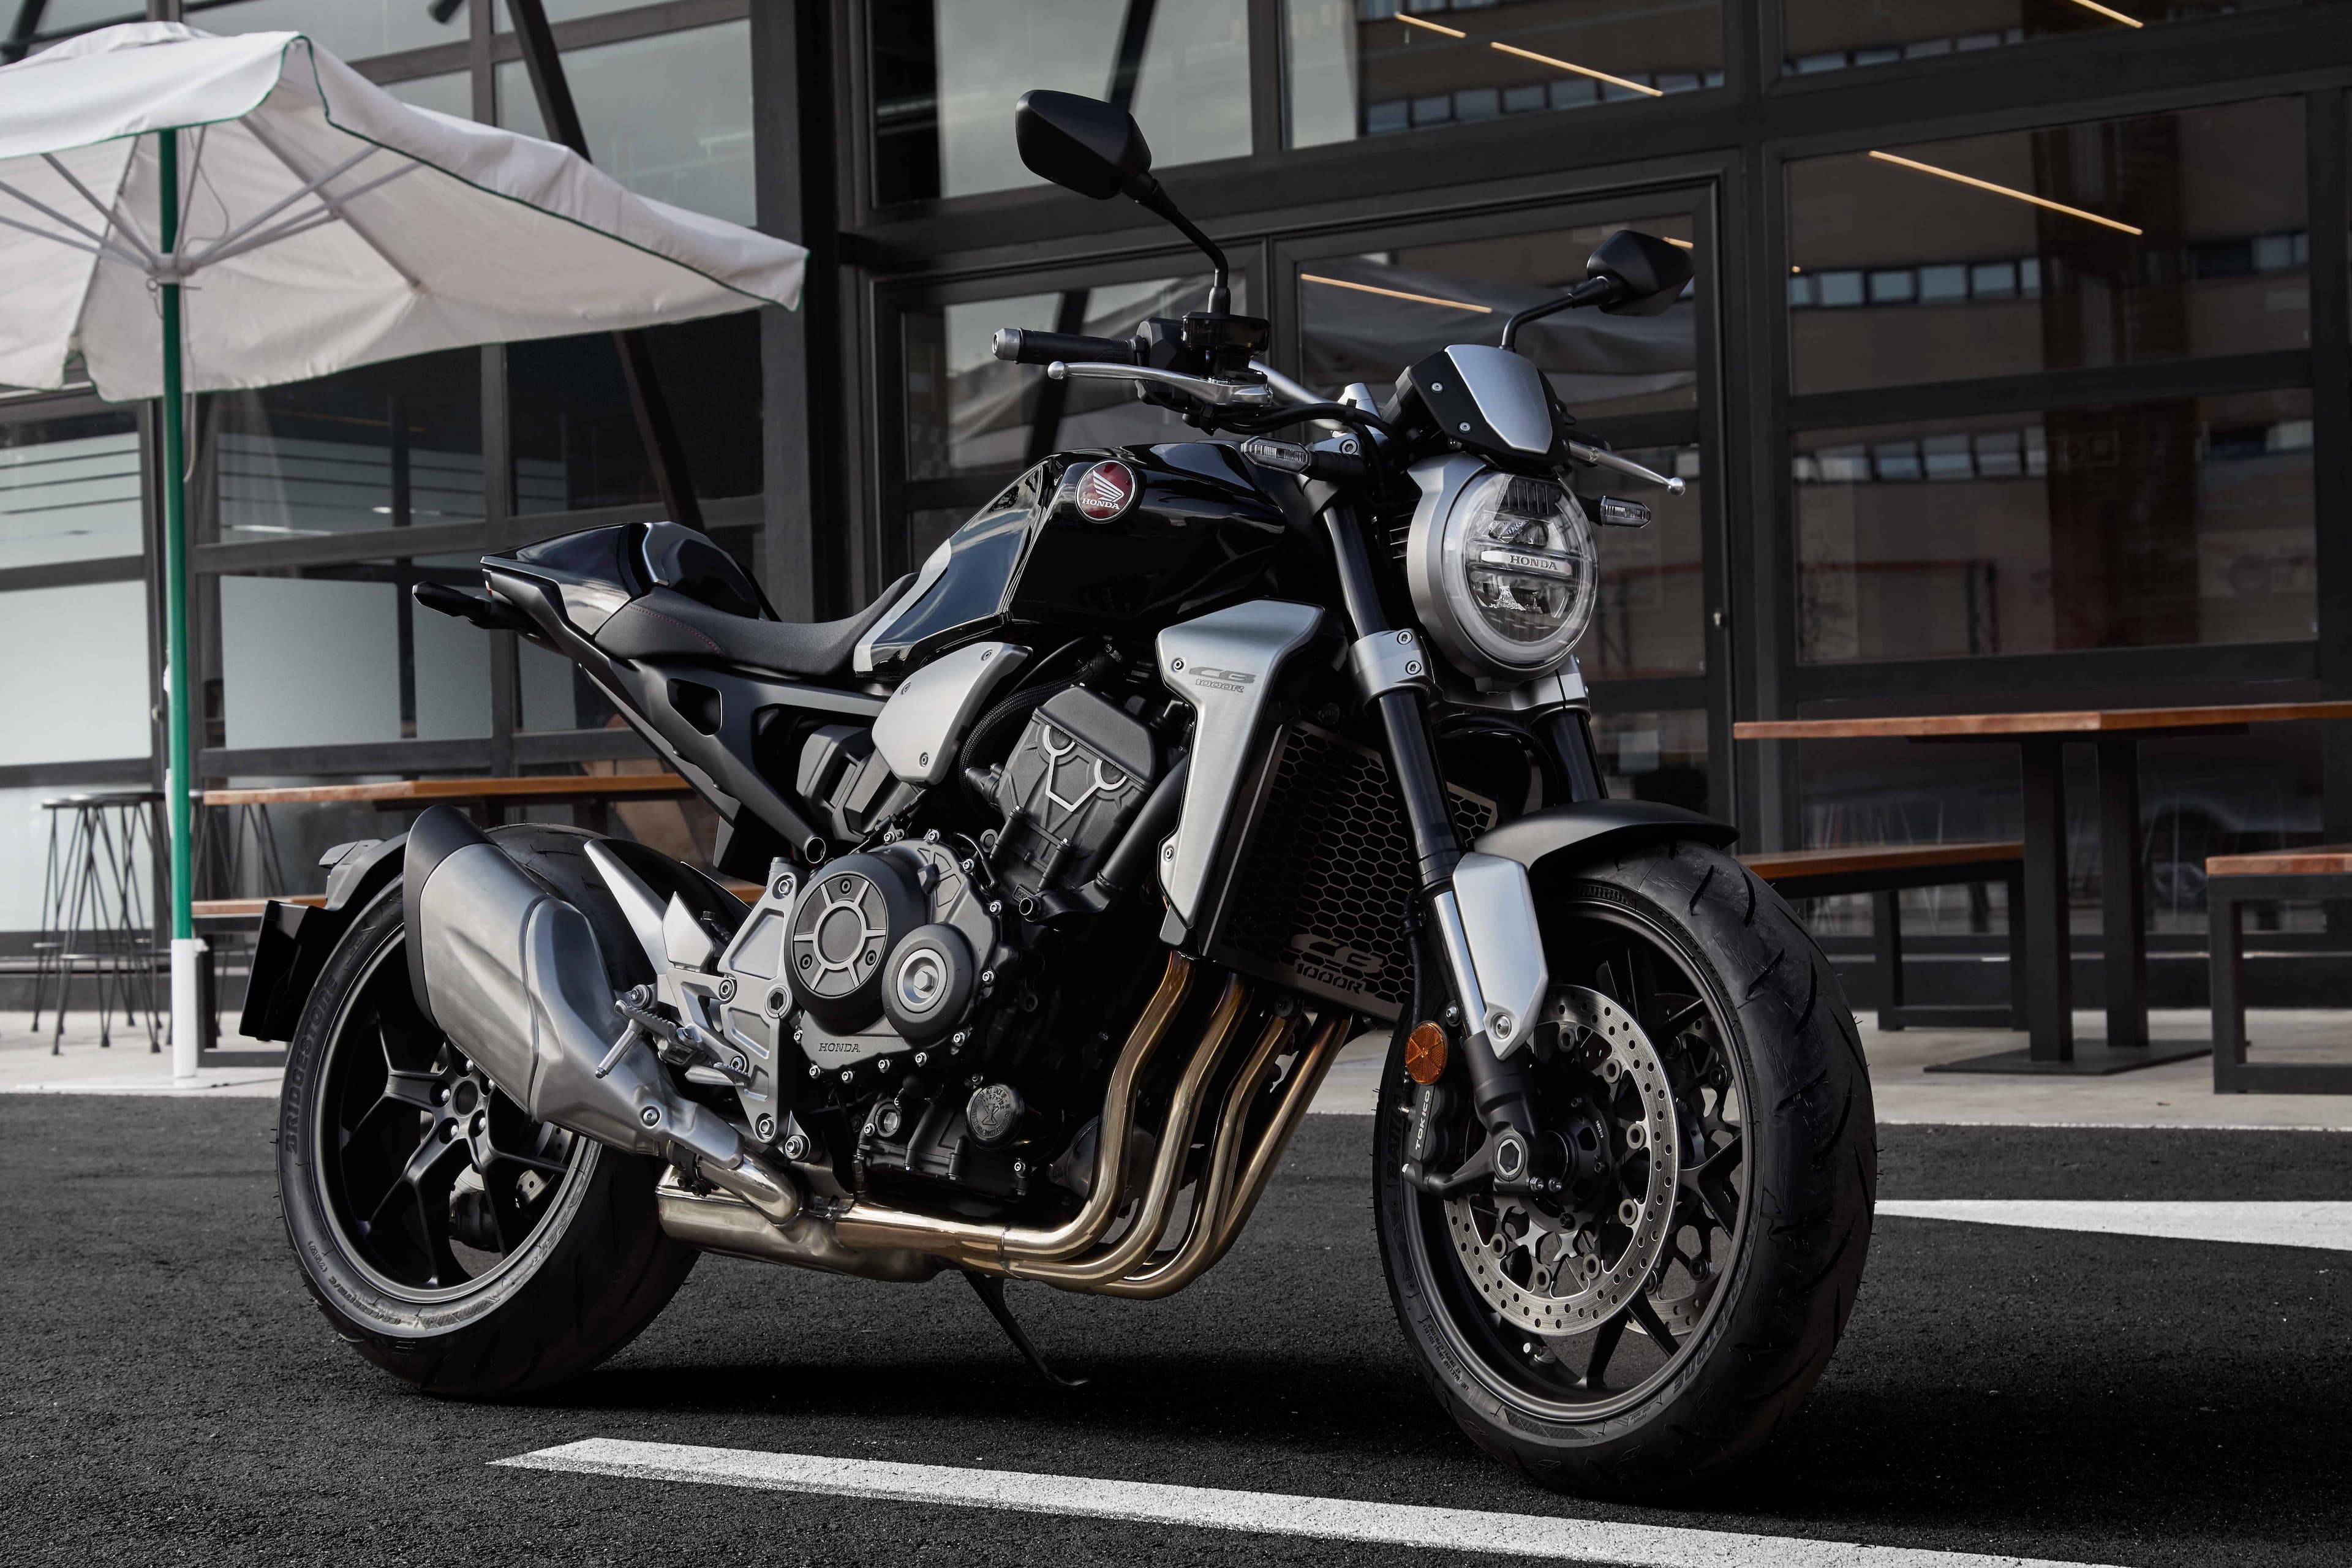 Honda Unveils the Neo Sports Cafe as the CB1000R and We are in Love